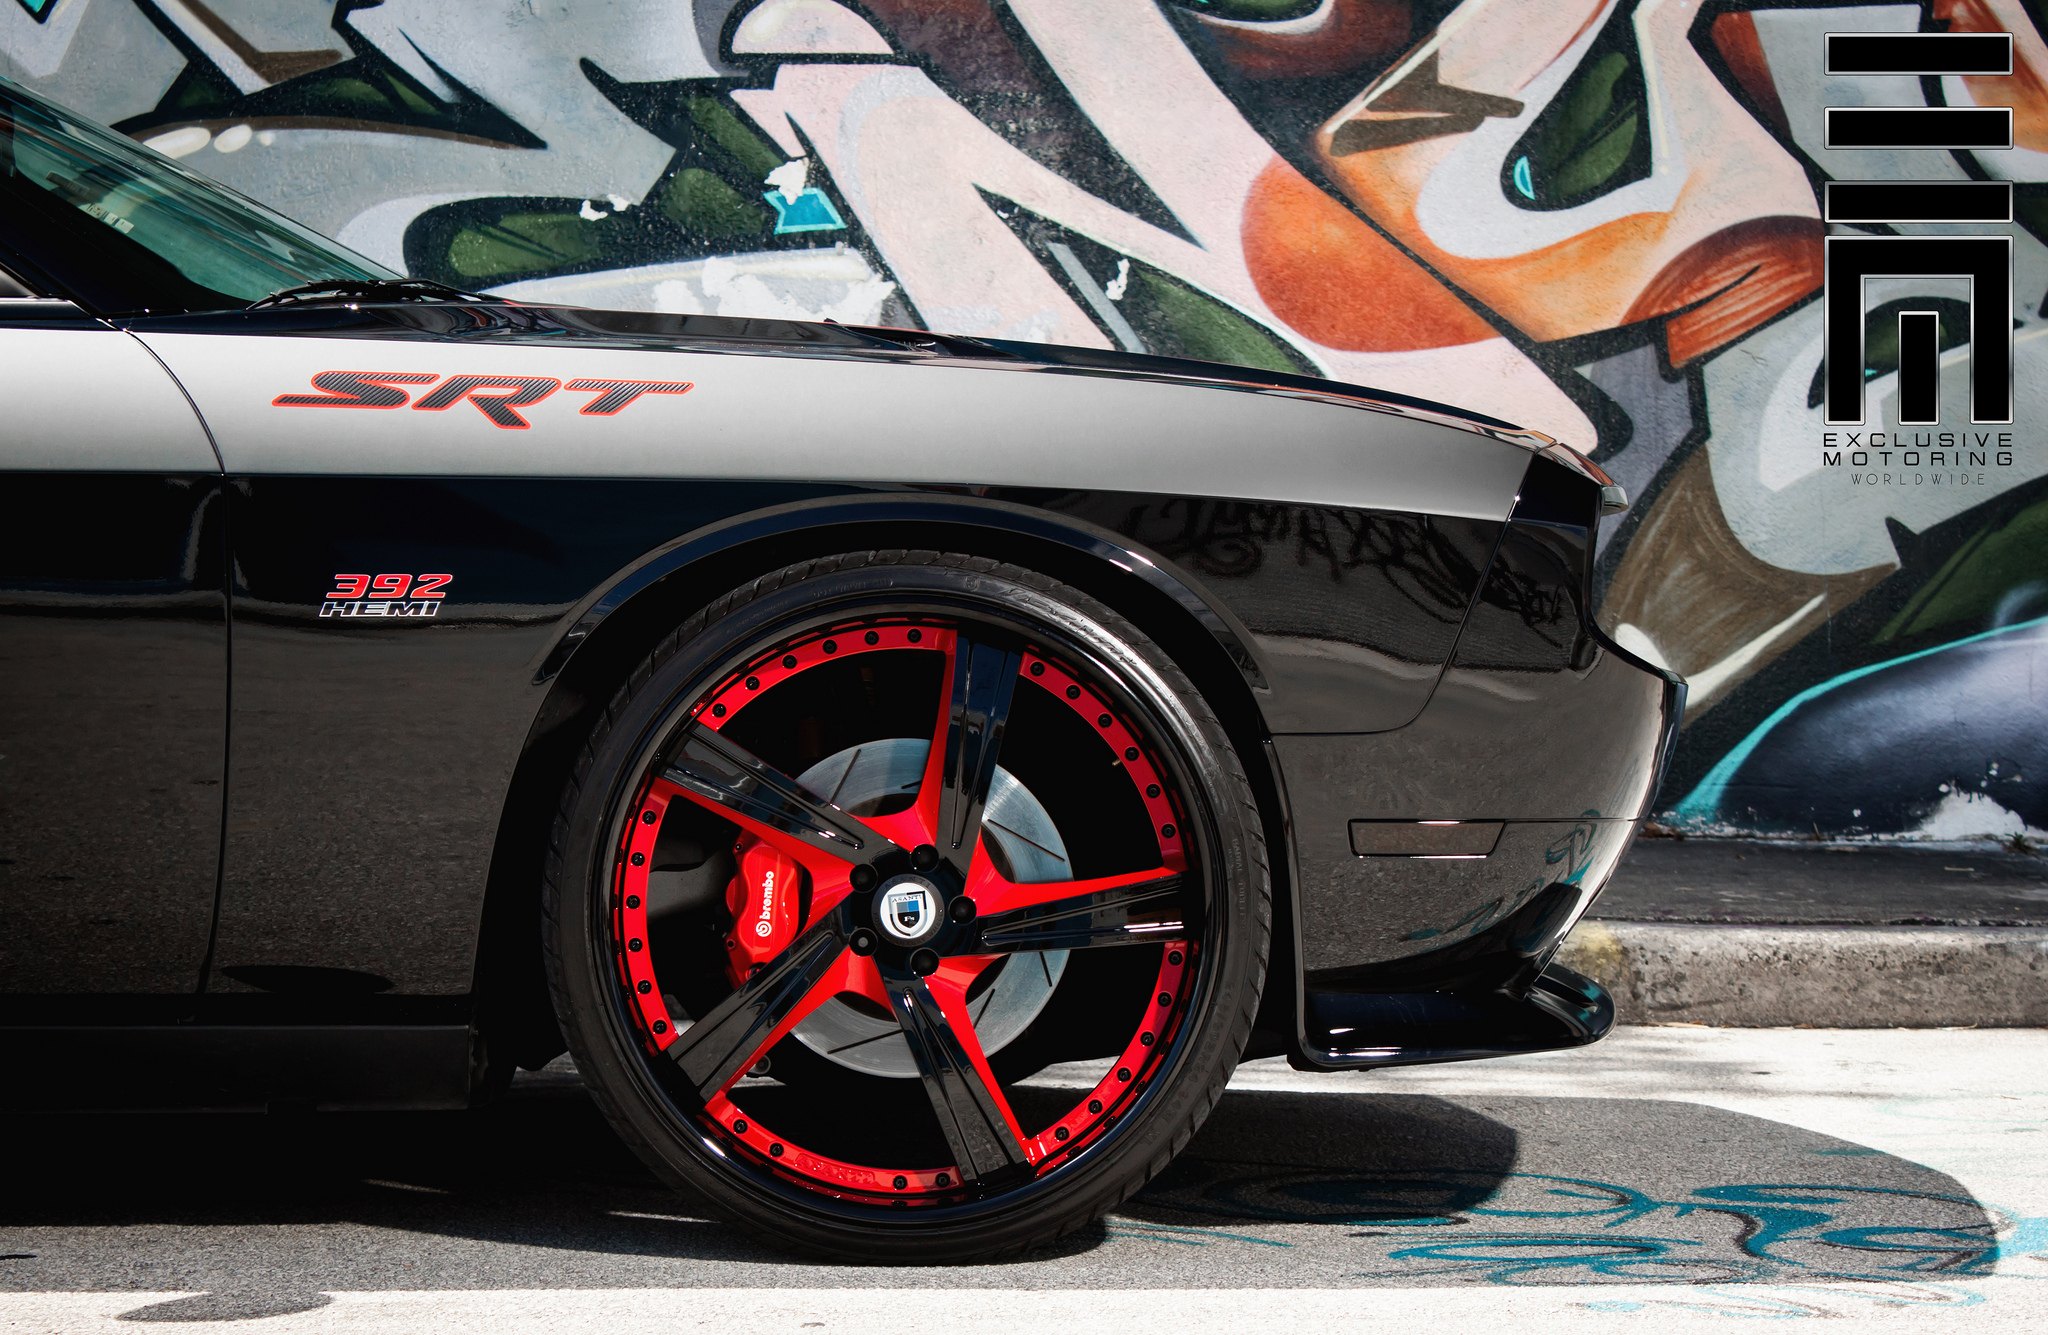 Asanti Wheels with Brembo brake caliper on Challenger - Photo by Exclusive Motoring